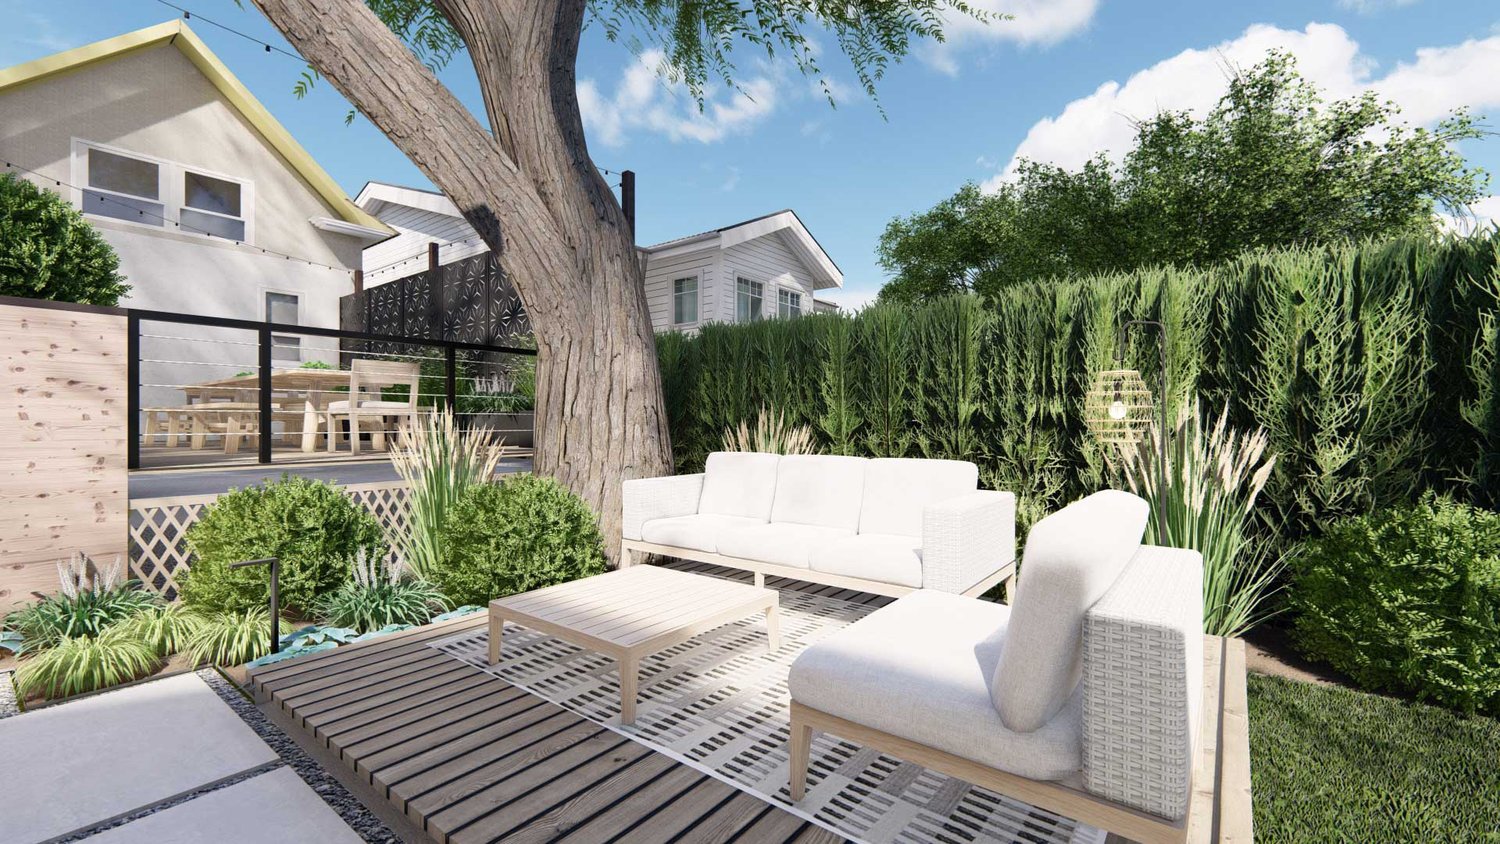 Joliet yard with patio, deck, a tree and hanging plants